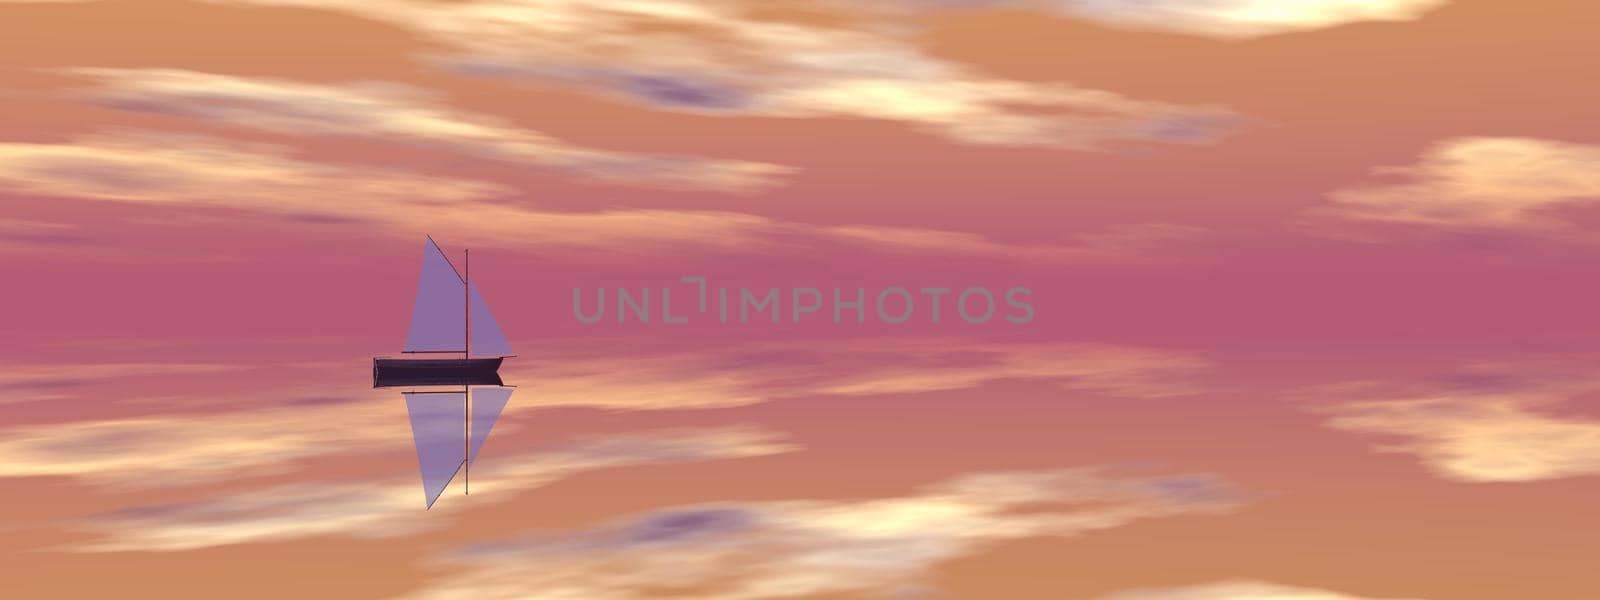 a very beautiful sailboat on the sea with a very beautiful landscape and sky - 3d rendering